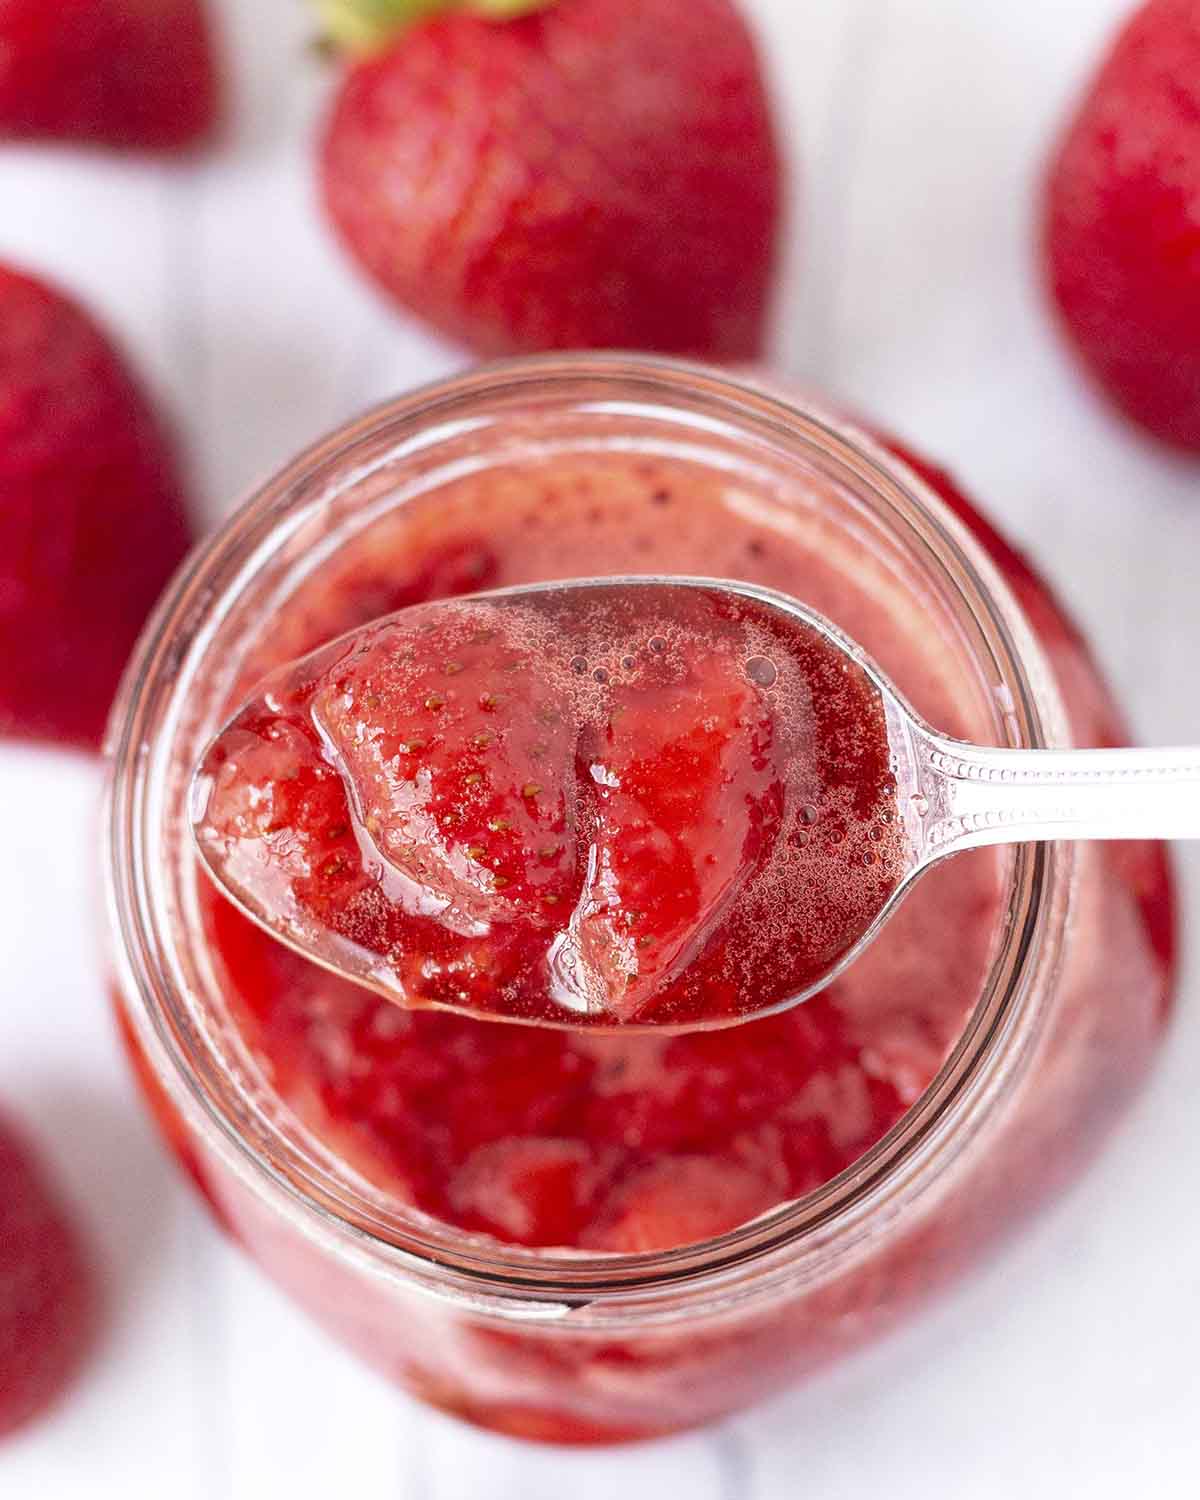 A spoon full of strawberry dipping sauce being held over a jar of the sauce.